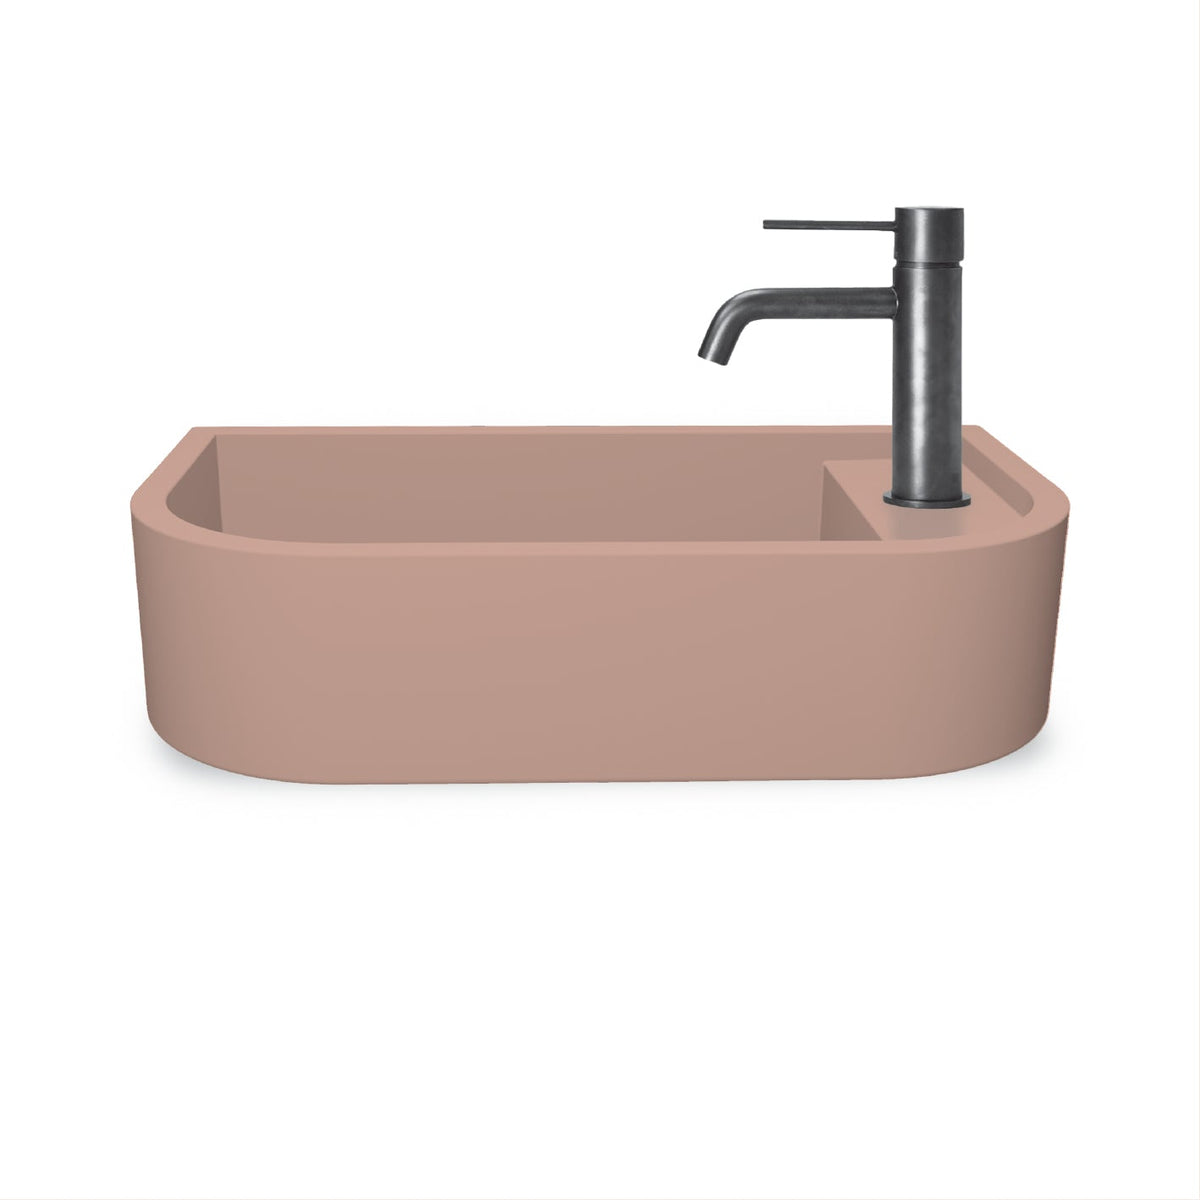 Loop 02 Basin - Overflow - Surface Mount (Blush Pink,Tap Hole,Brass)